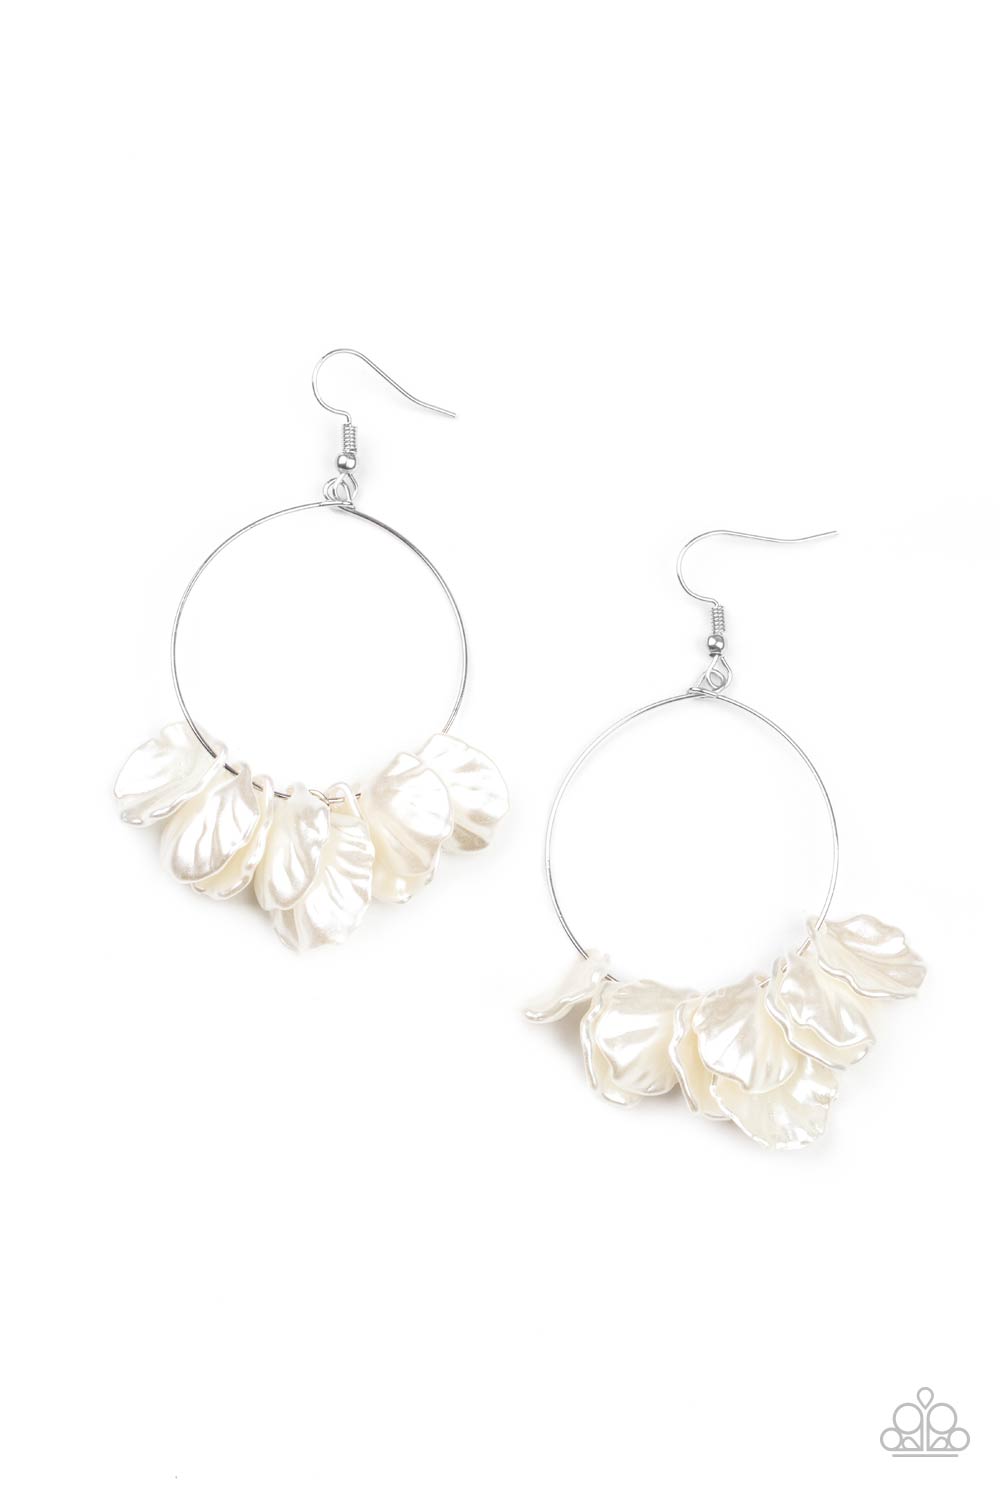 Sailboats and Seashells White Pearly Shell Earrings - Paparazzi Accessories- lightbox - CarasShop.com - $5 Jewelry by Cara Jewels